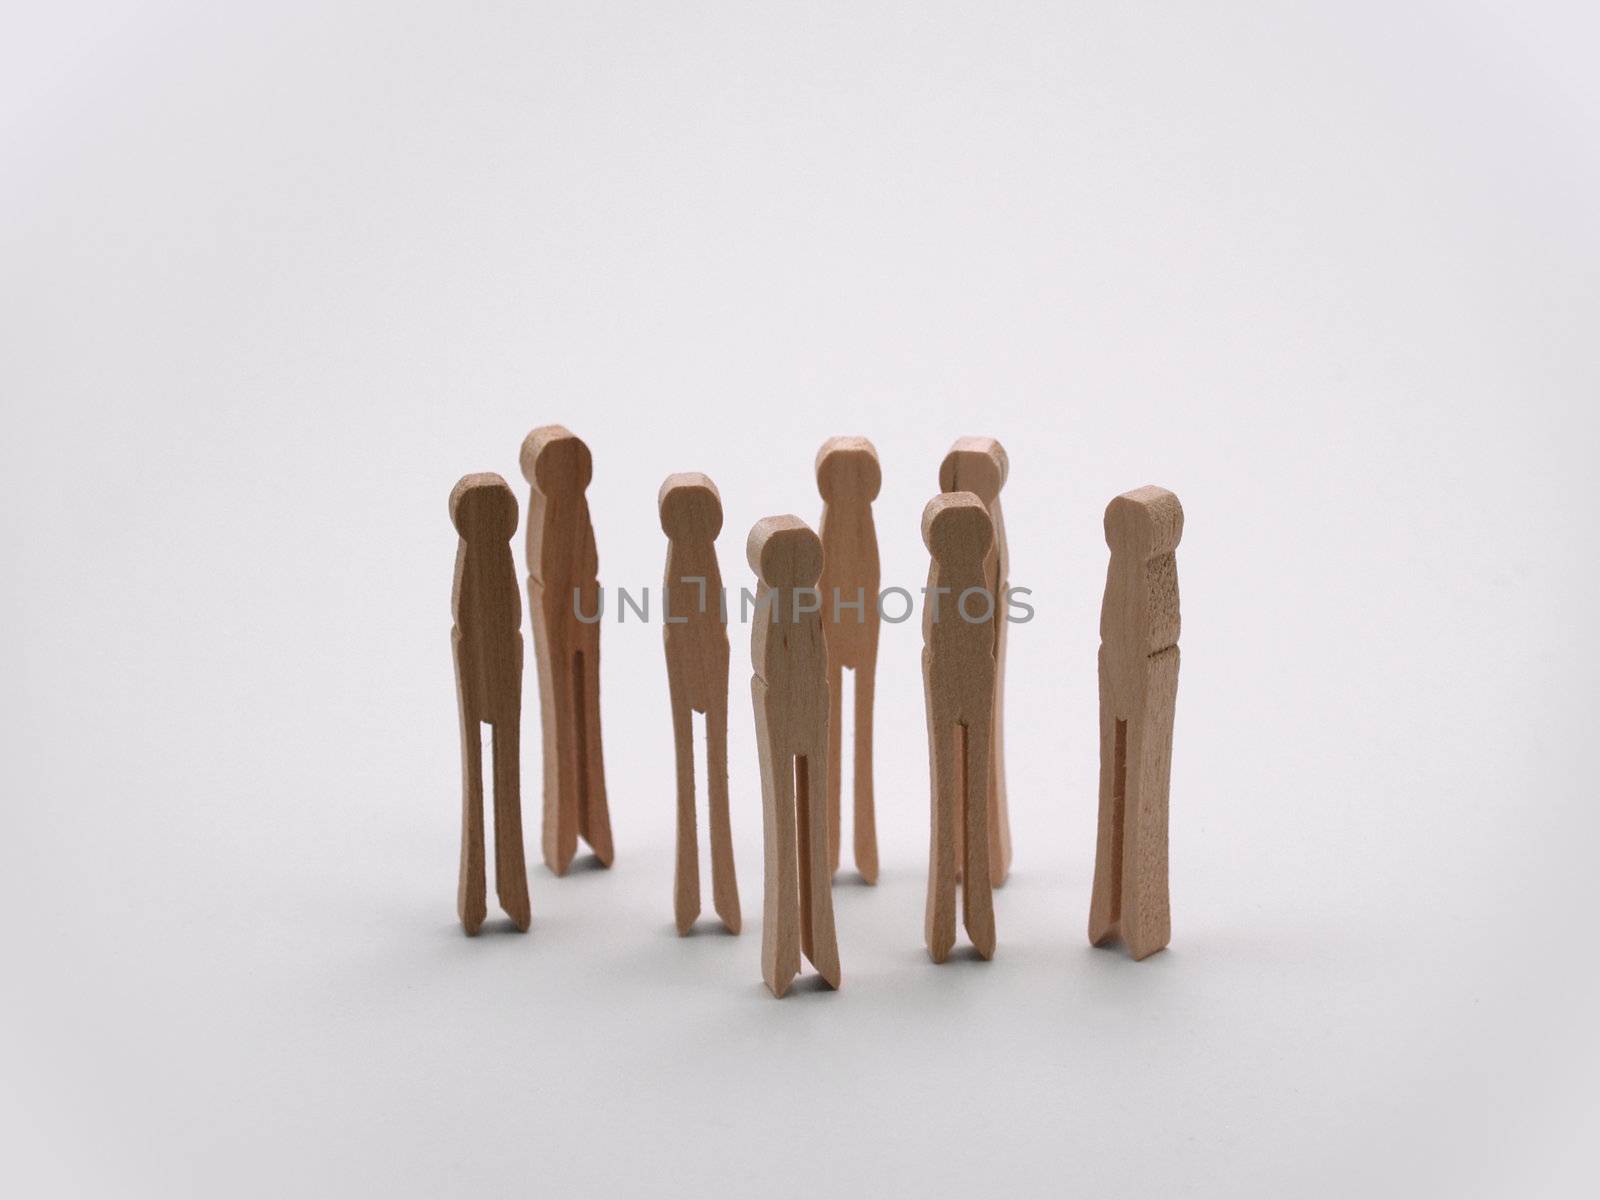 A bunch of clothespins standing in a group